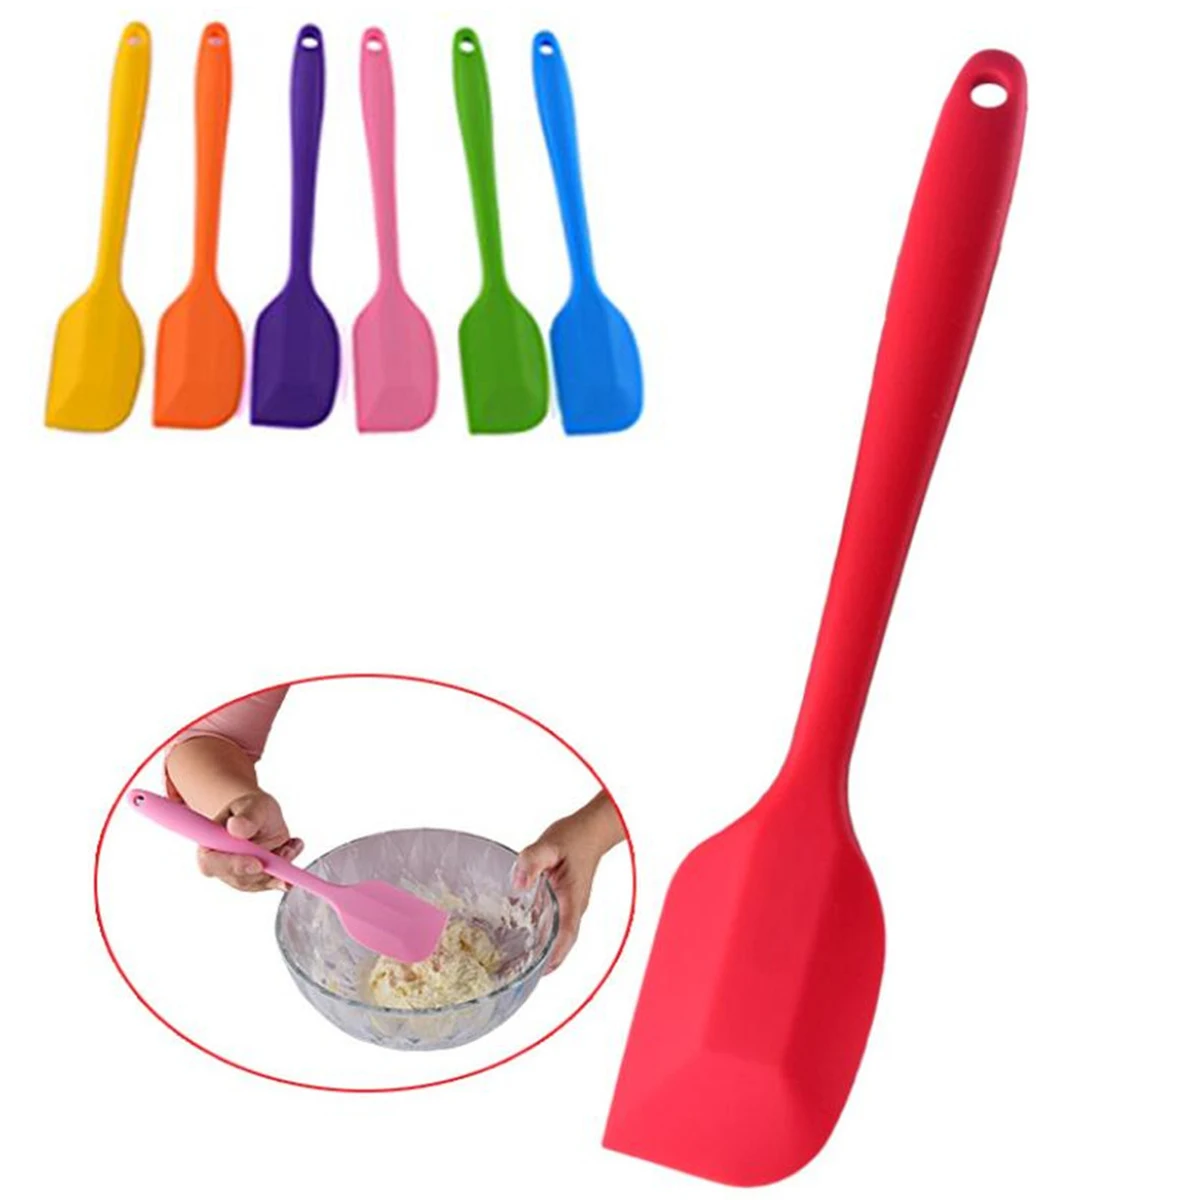 show original title Details about   Large Silicone Spatula Cooking Baking Scraper Cake Cream Mixing Tools Butter L8U7 